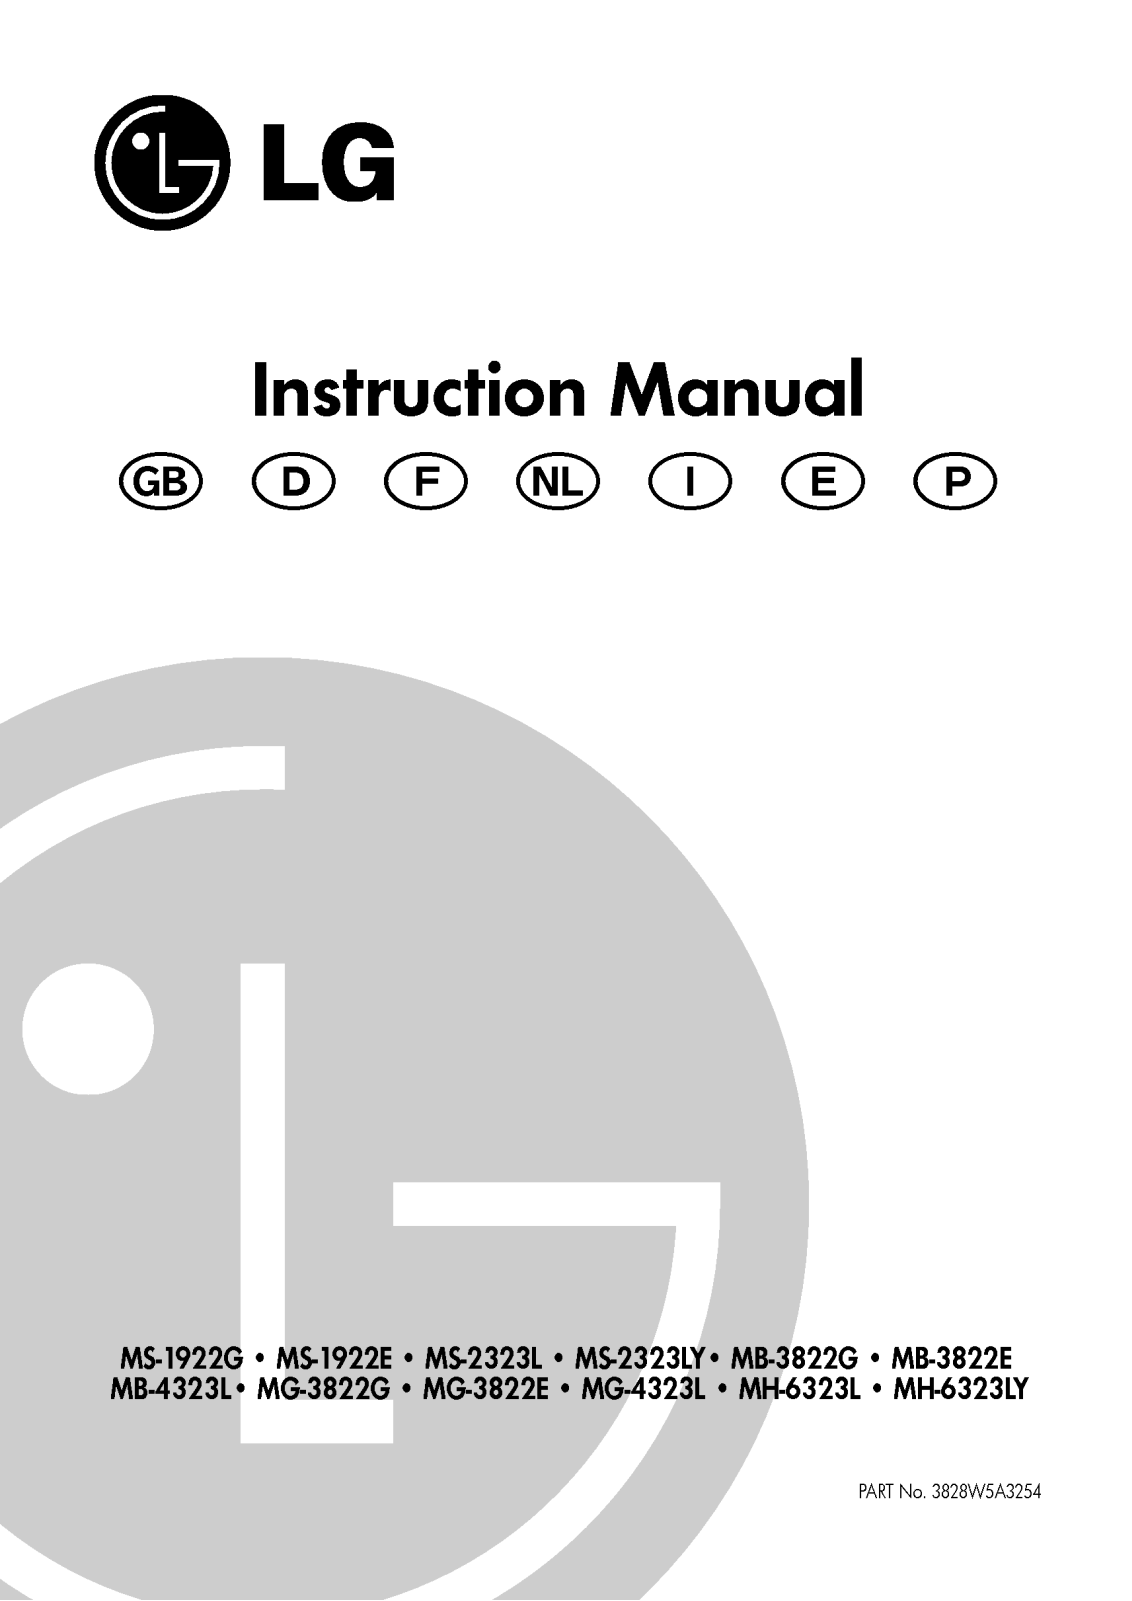 LG MH-6323LY, MS-2323LY User Manual